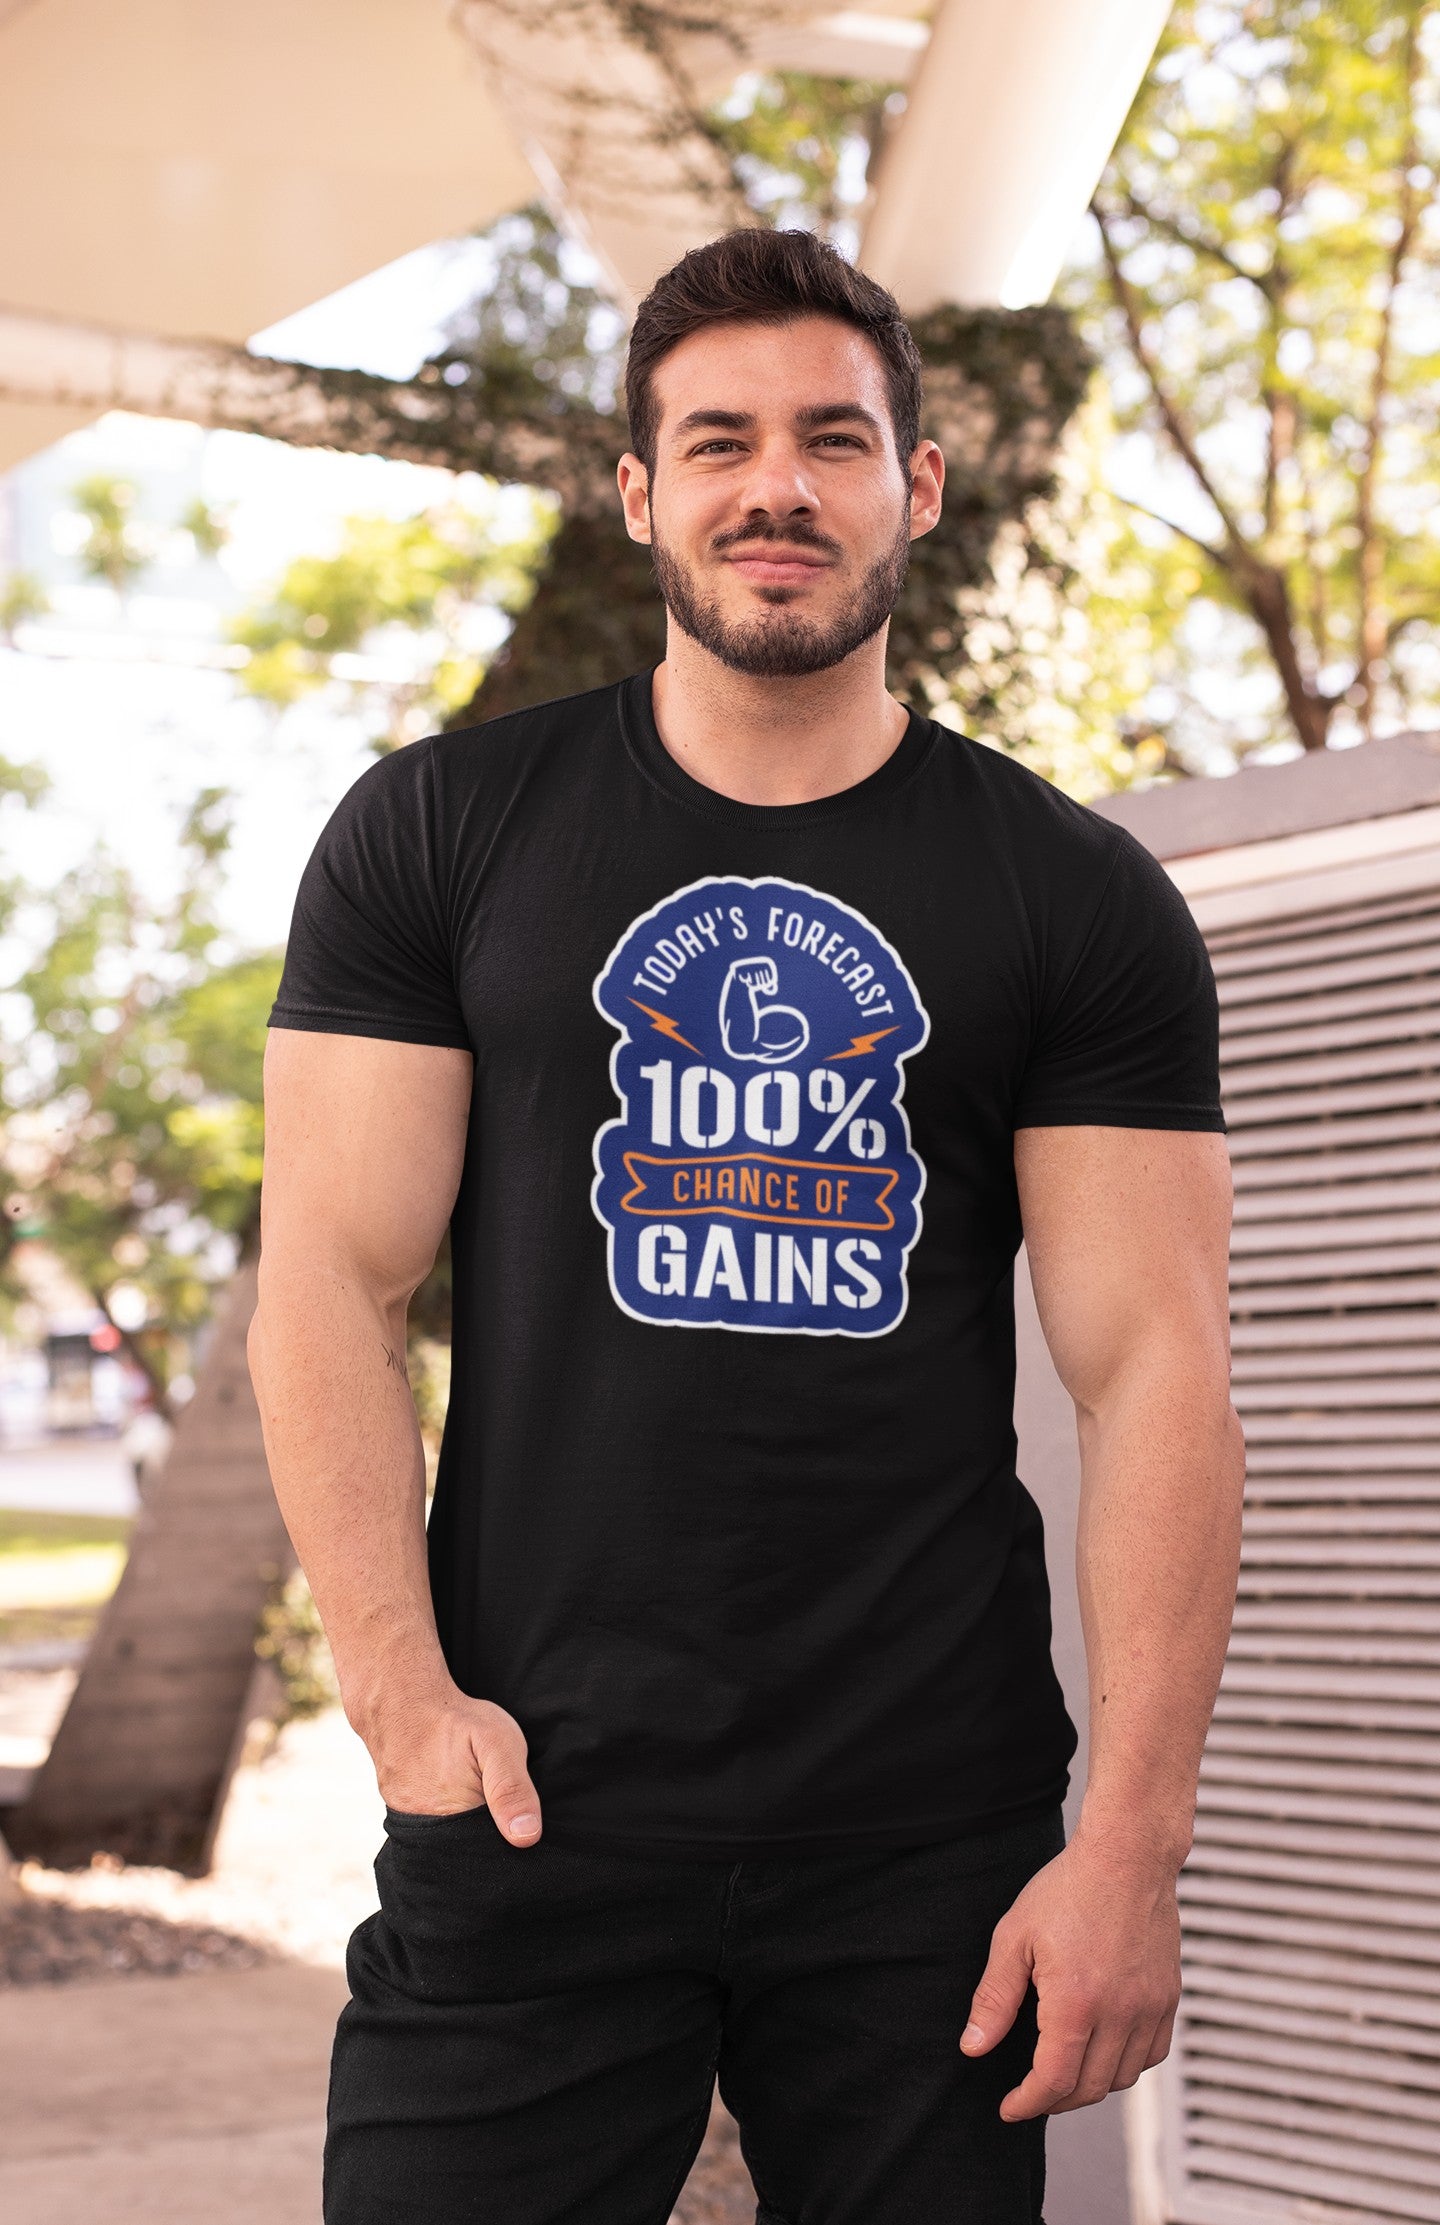 Gym T Shirt - Today's Forecast 100% Chance Of Gains - Sports T Shirt - Strong Soul